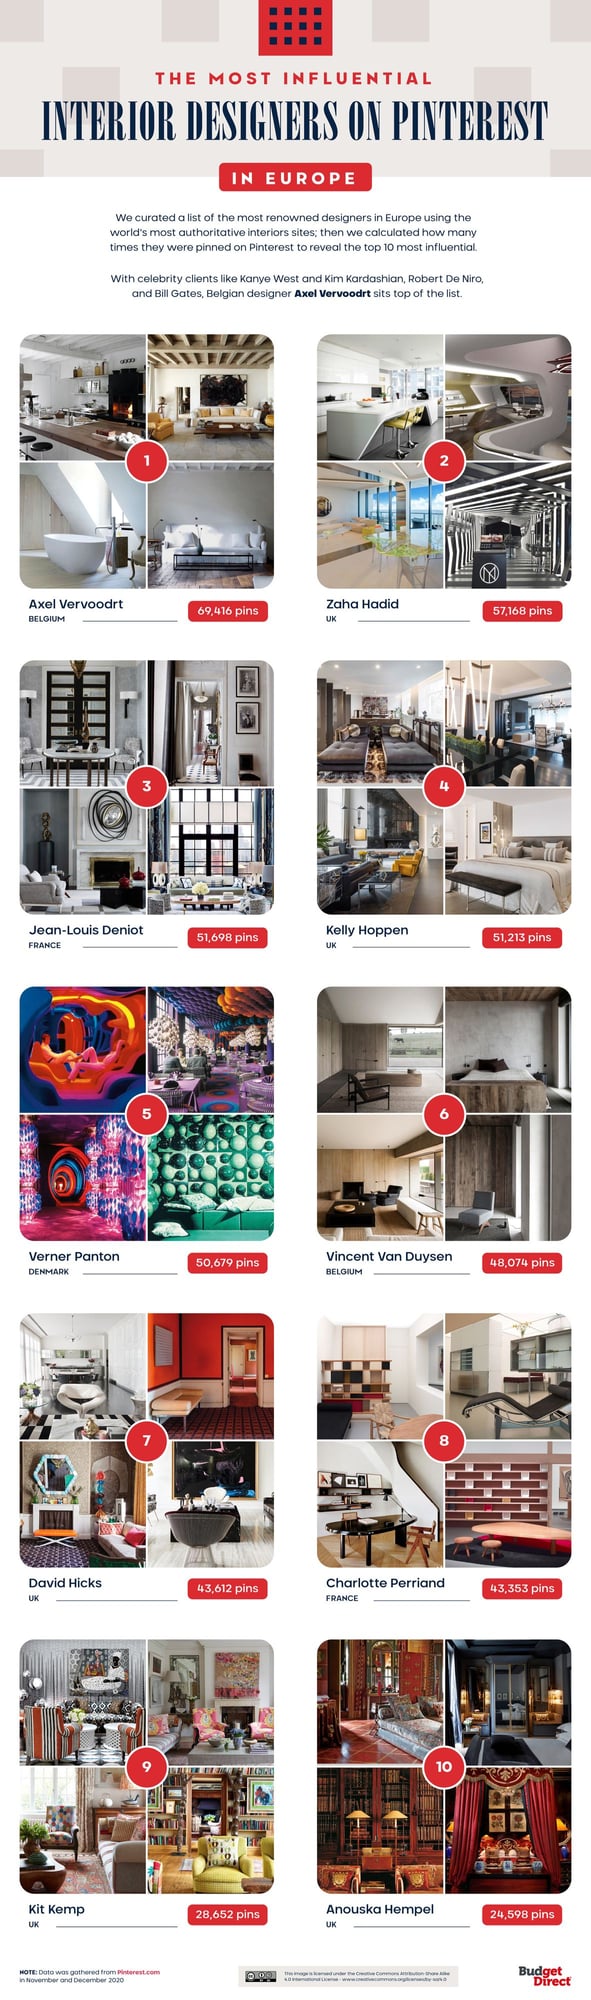 Budget Direct Home Insurance's Most Influential European Interior Designers on Pinterest